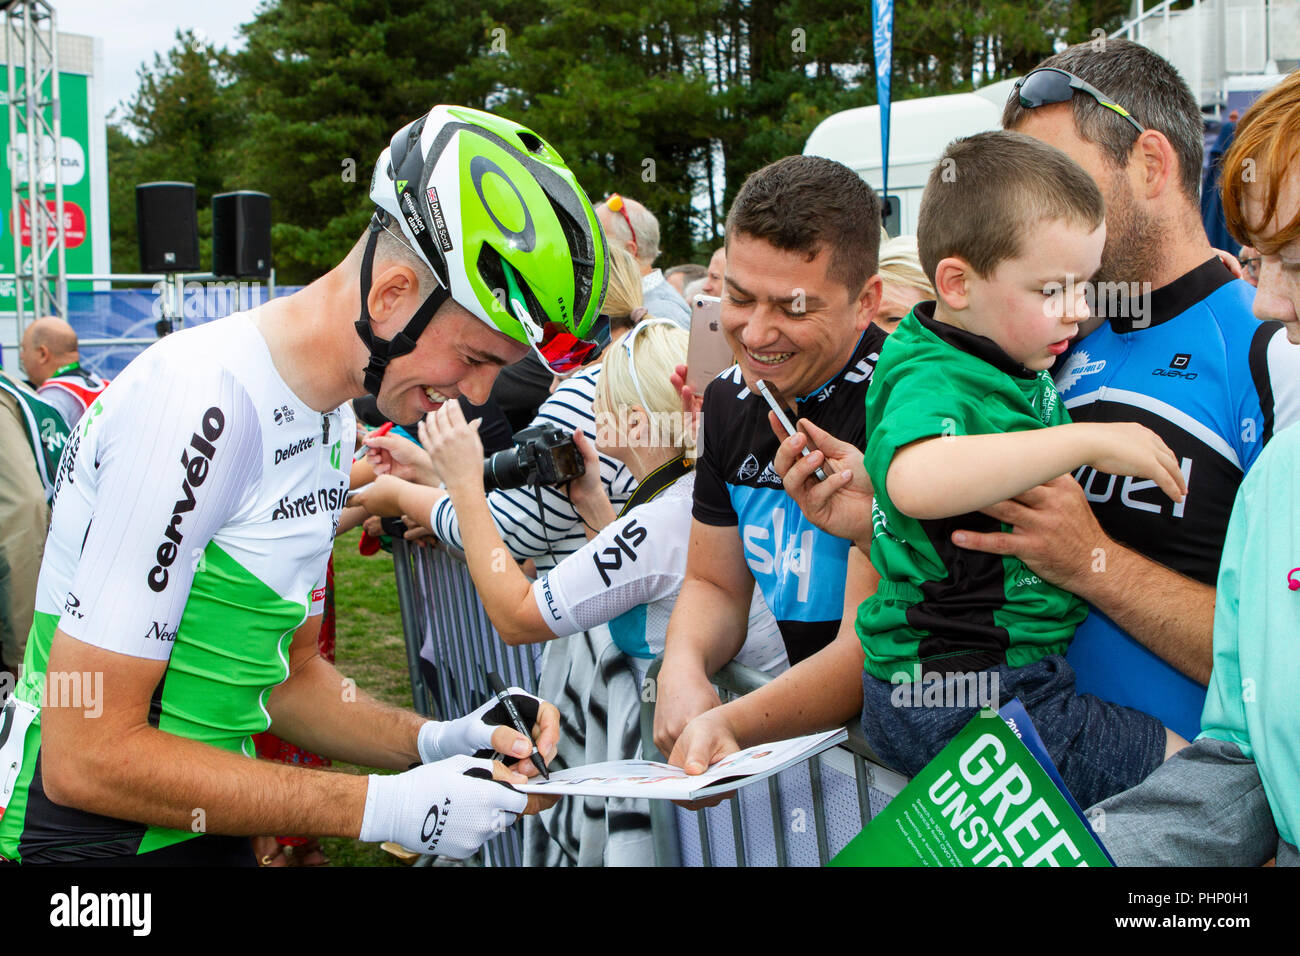 Professional cyclist Scott Davies (Wales) of Carmarthen (TEAM DIMENSION DATA) signs autographs ahead of the start of Stage 1 of the Tour of Britain cycling race starting at Pembrey Country Park. Stock Photo